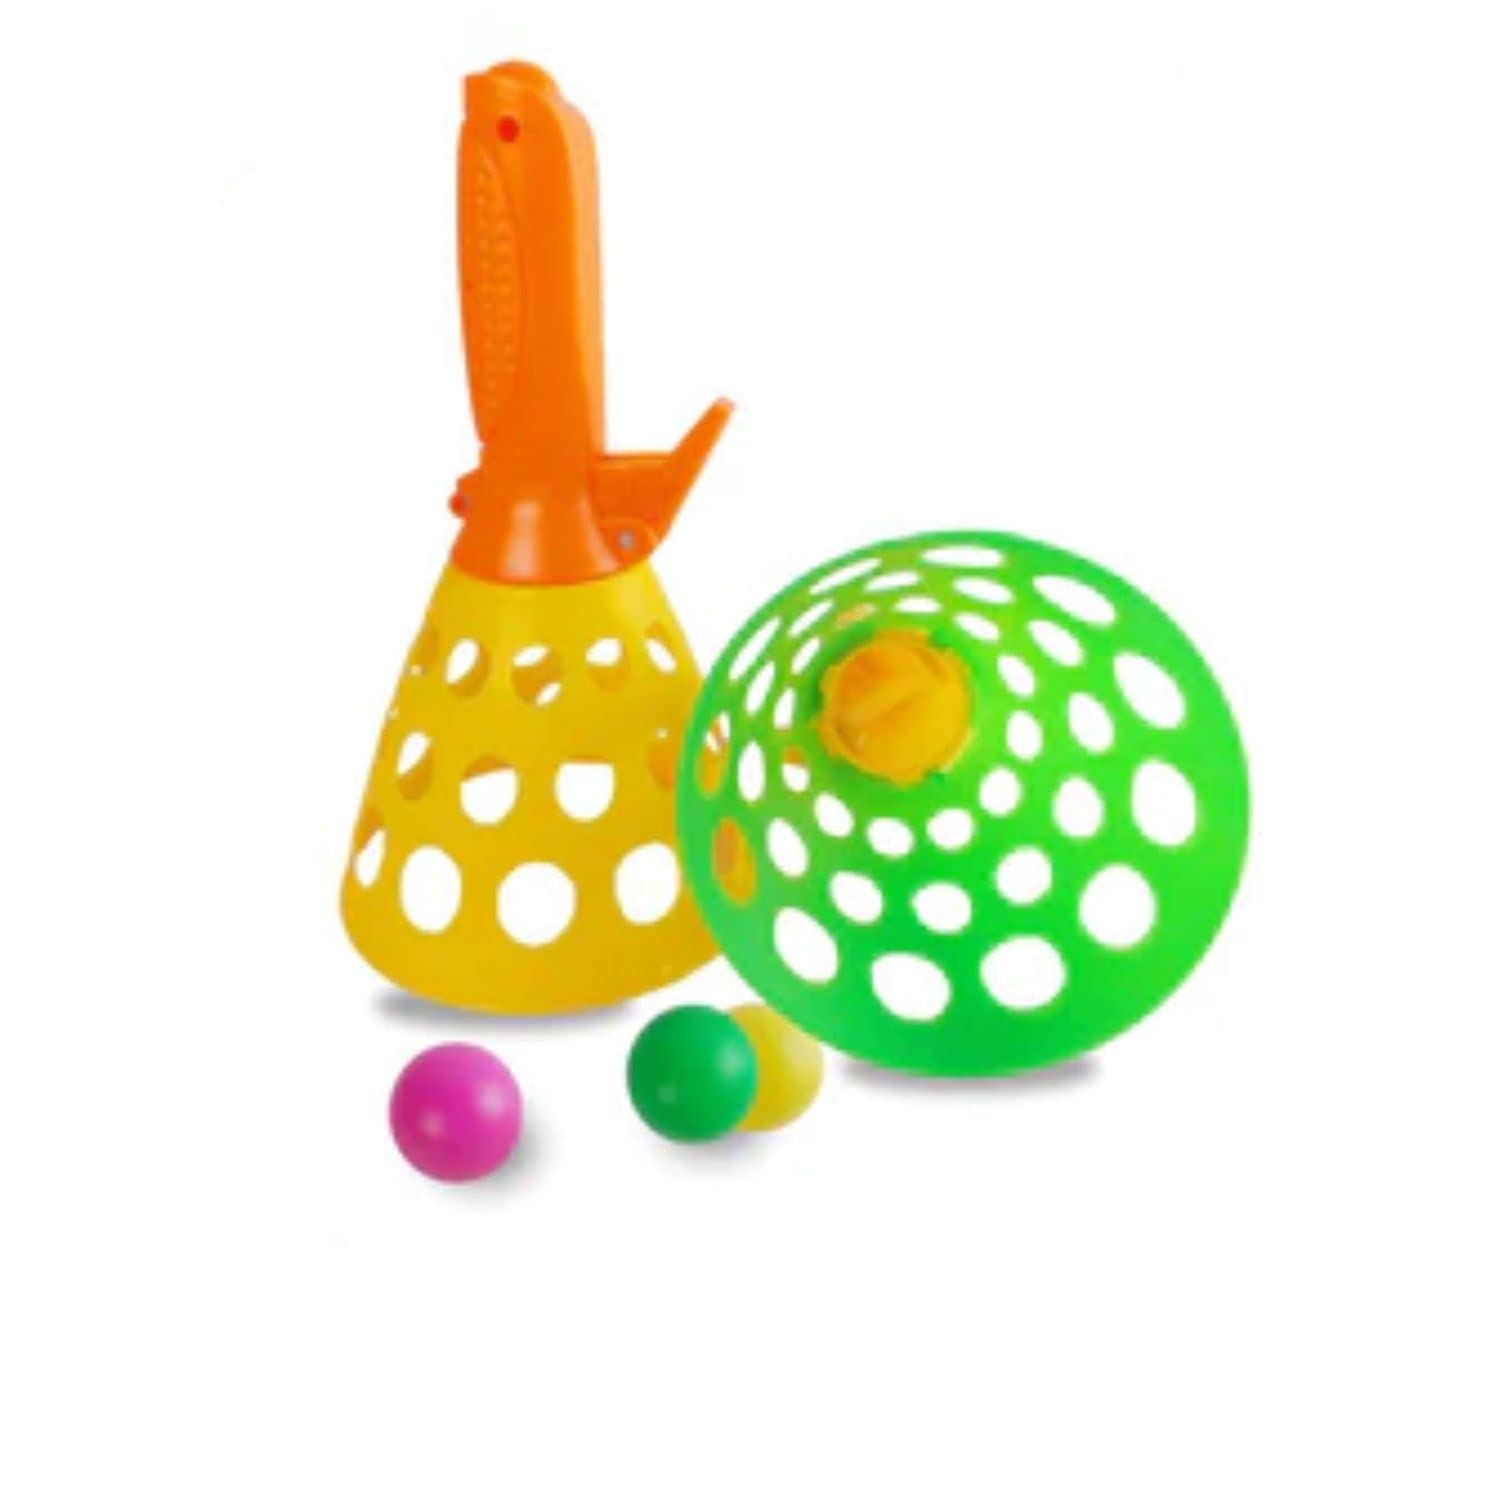 Kids Mandi double butt catapult ball for outdoor sports.